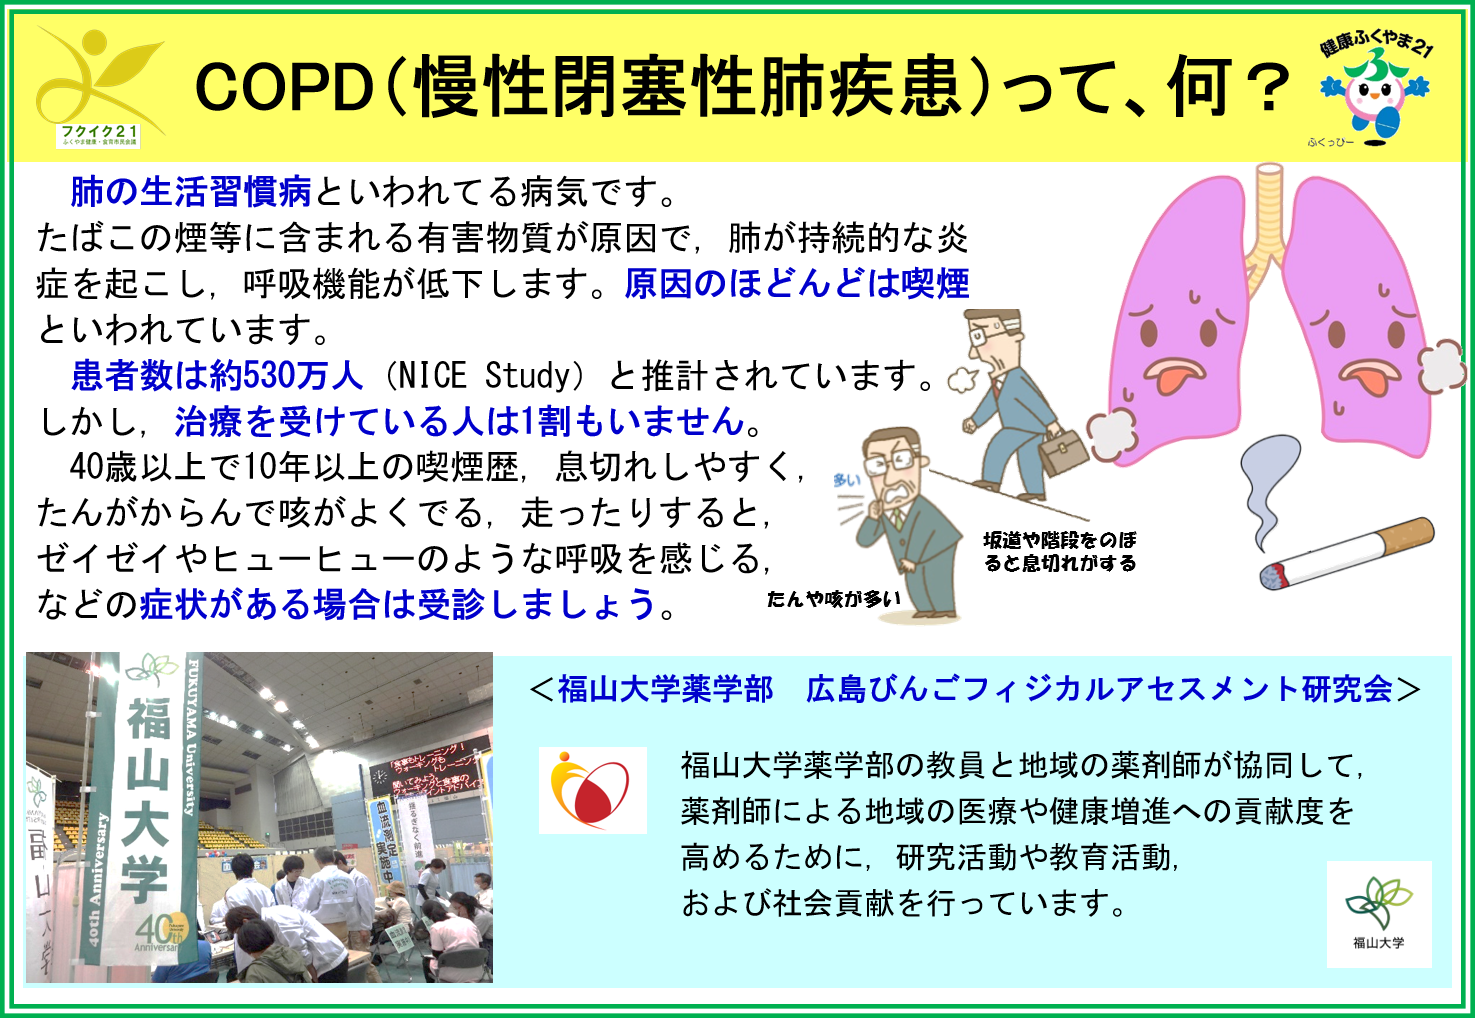 COPD（慢性閉塞性肺疾患）って、何？